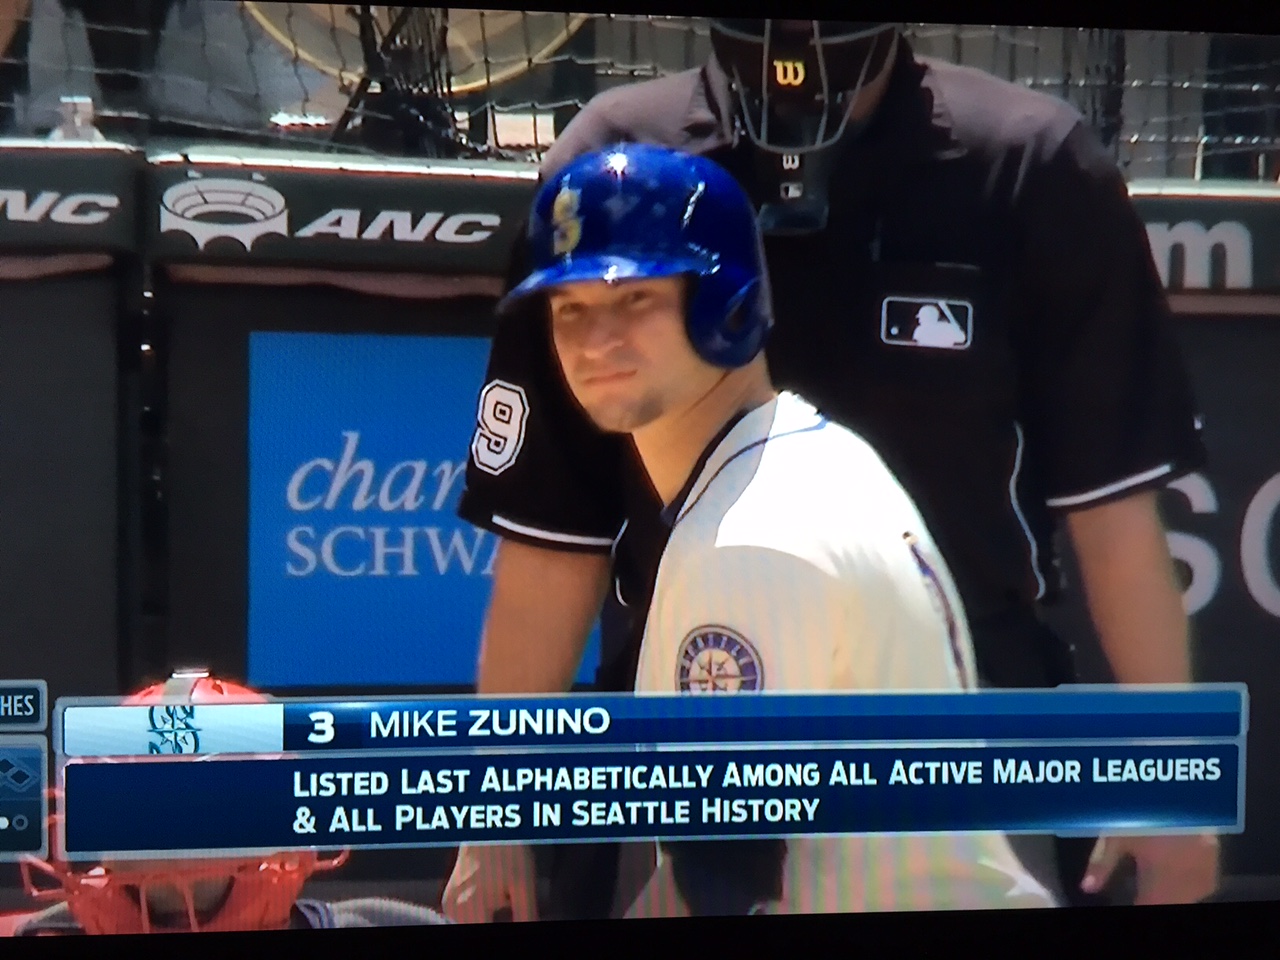 mike zunino meme - Fe Vc Danc char Schw Hes 3 Mike Zunino Listed Last Alphabetically Among All Active Major Leaguers & All Players In Seattle History